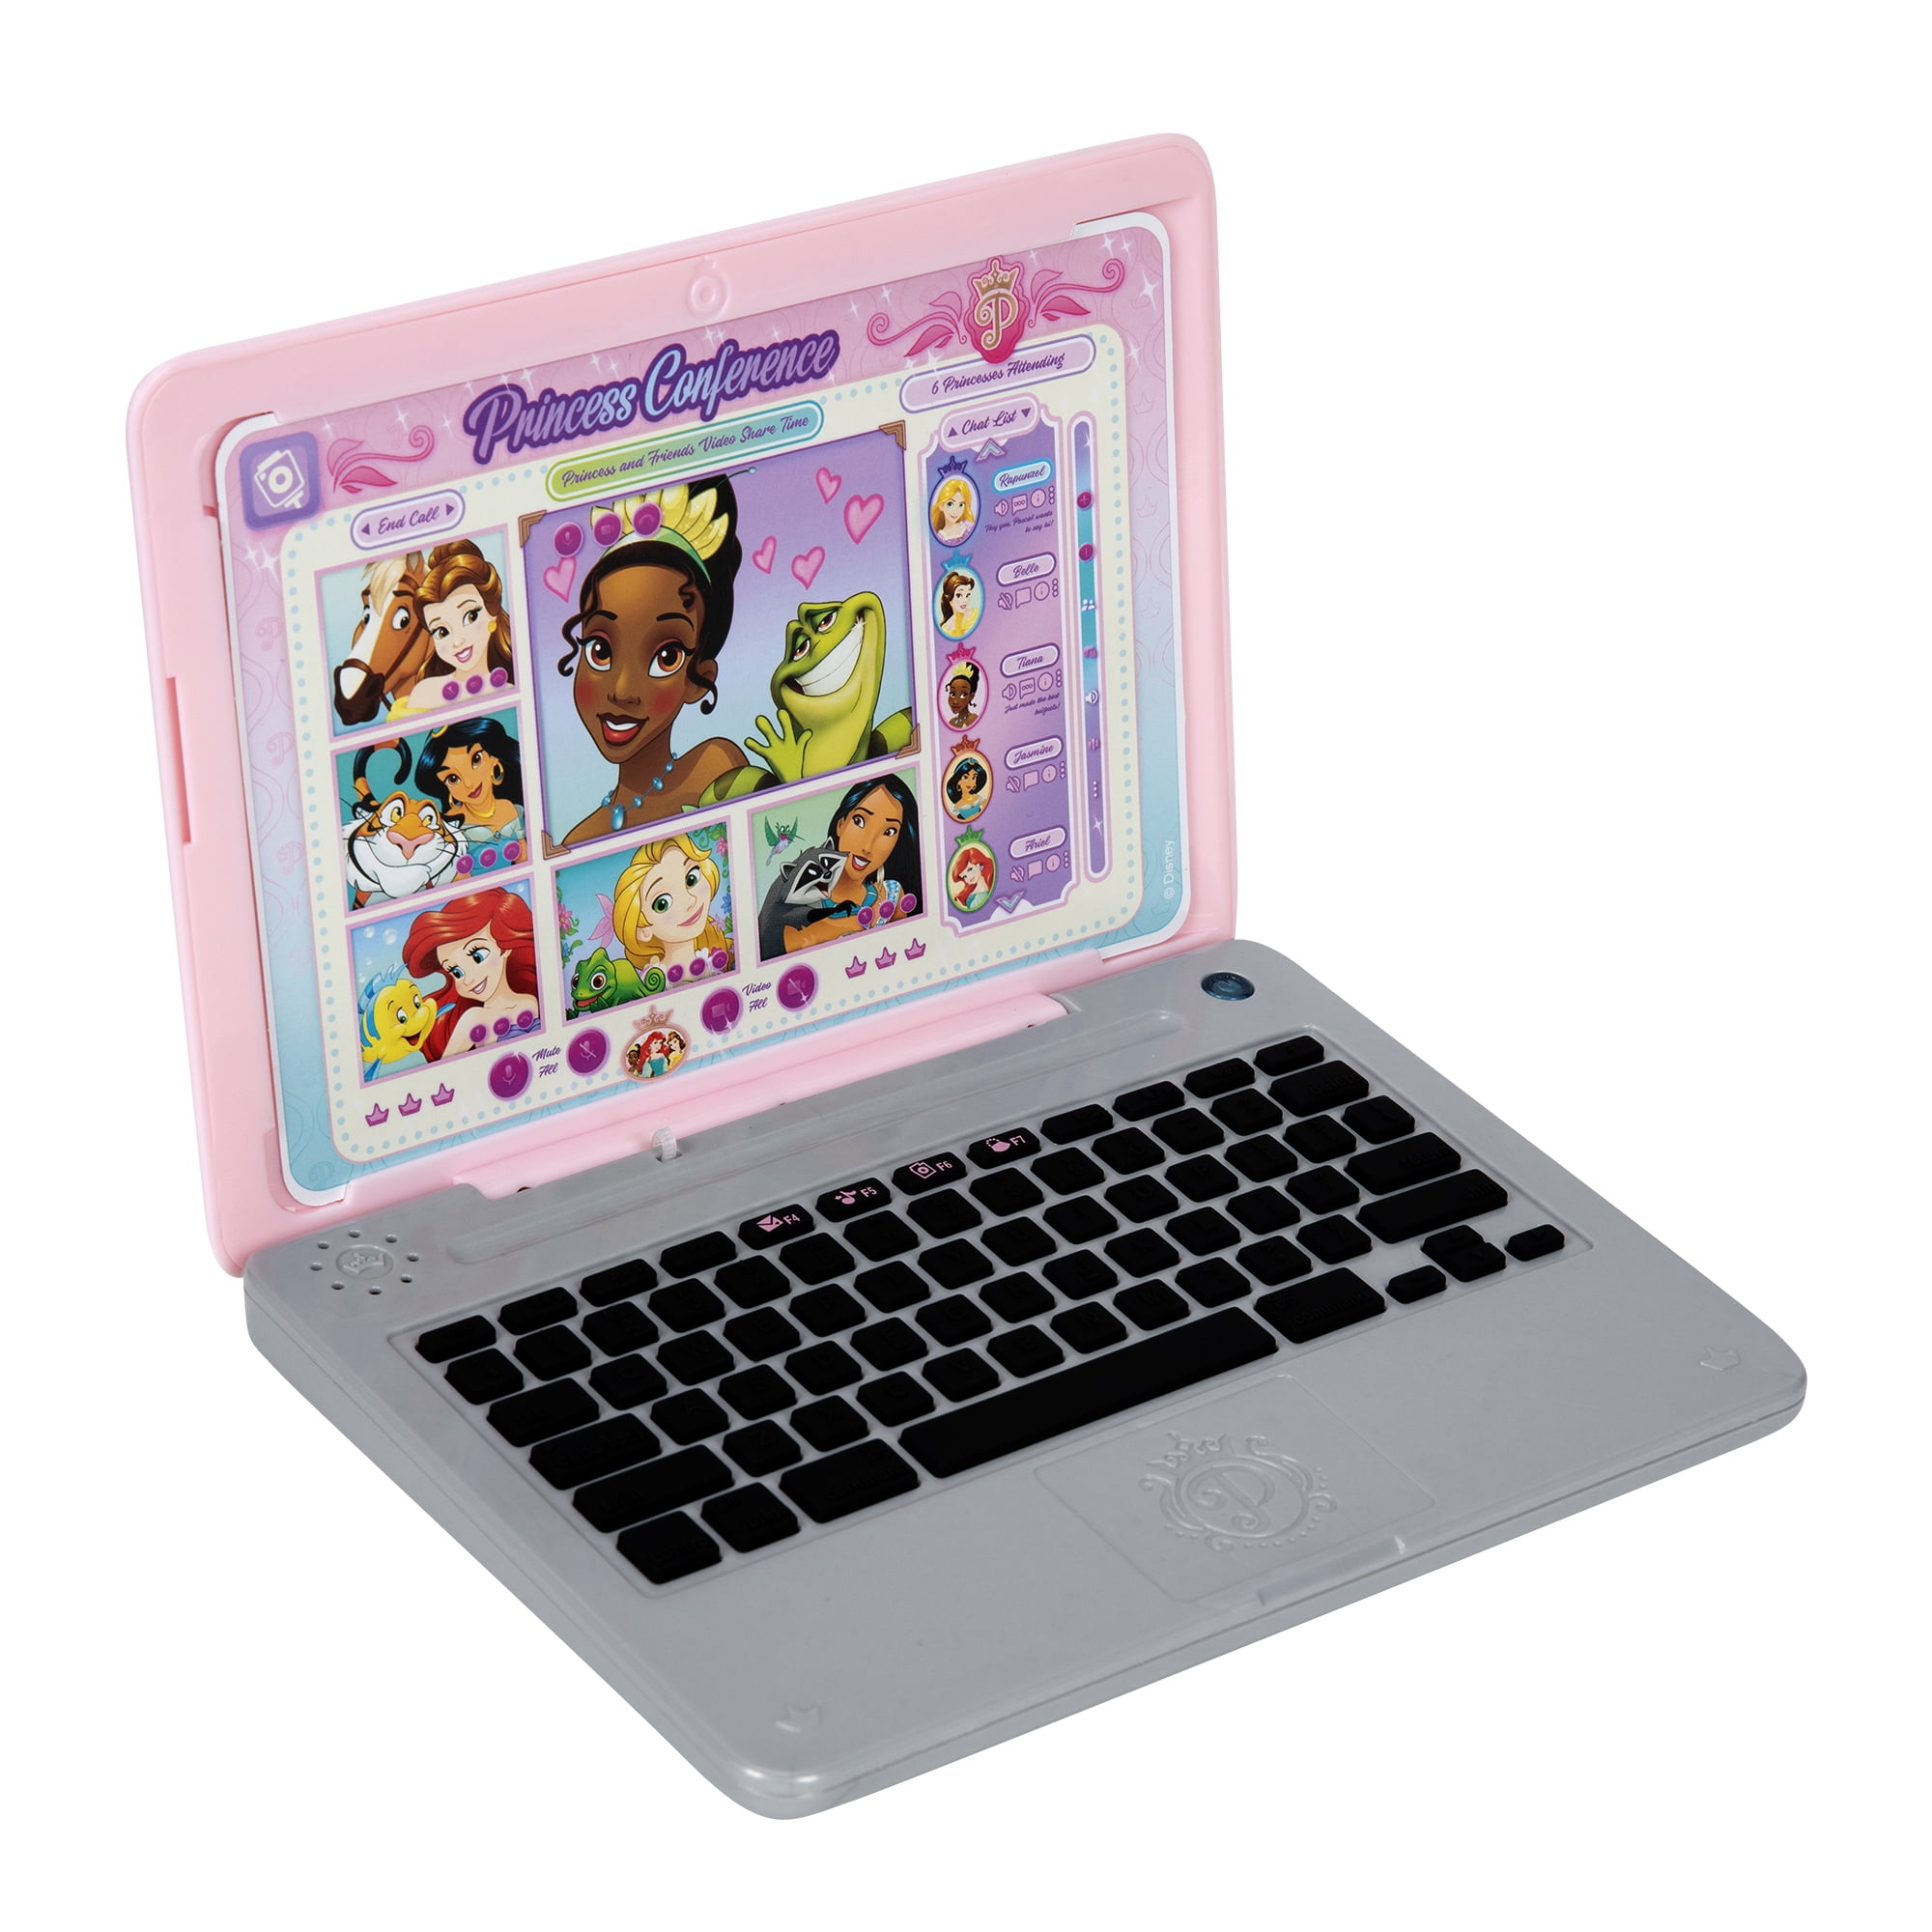 Disney Princess Style Collection Laptop with Phrases Sound Effects & Music Girls Toy Pretend Laptop 